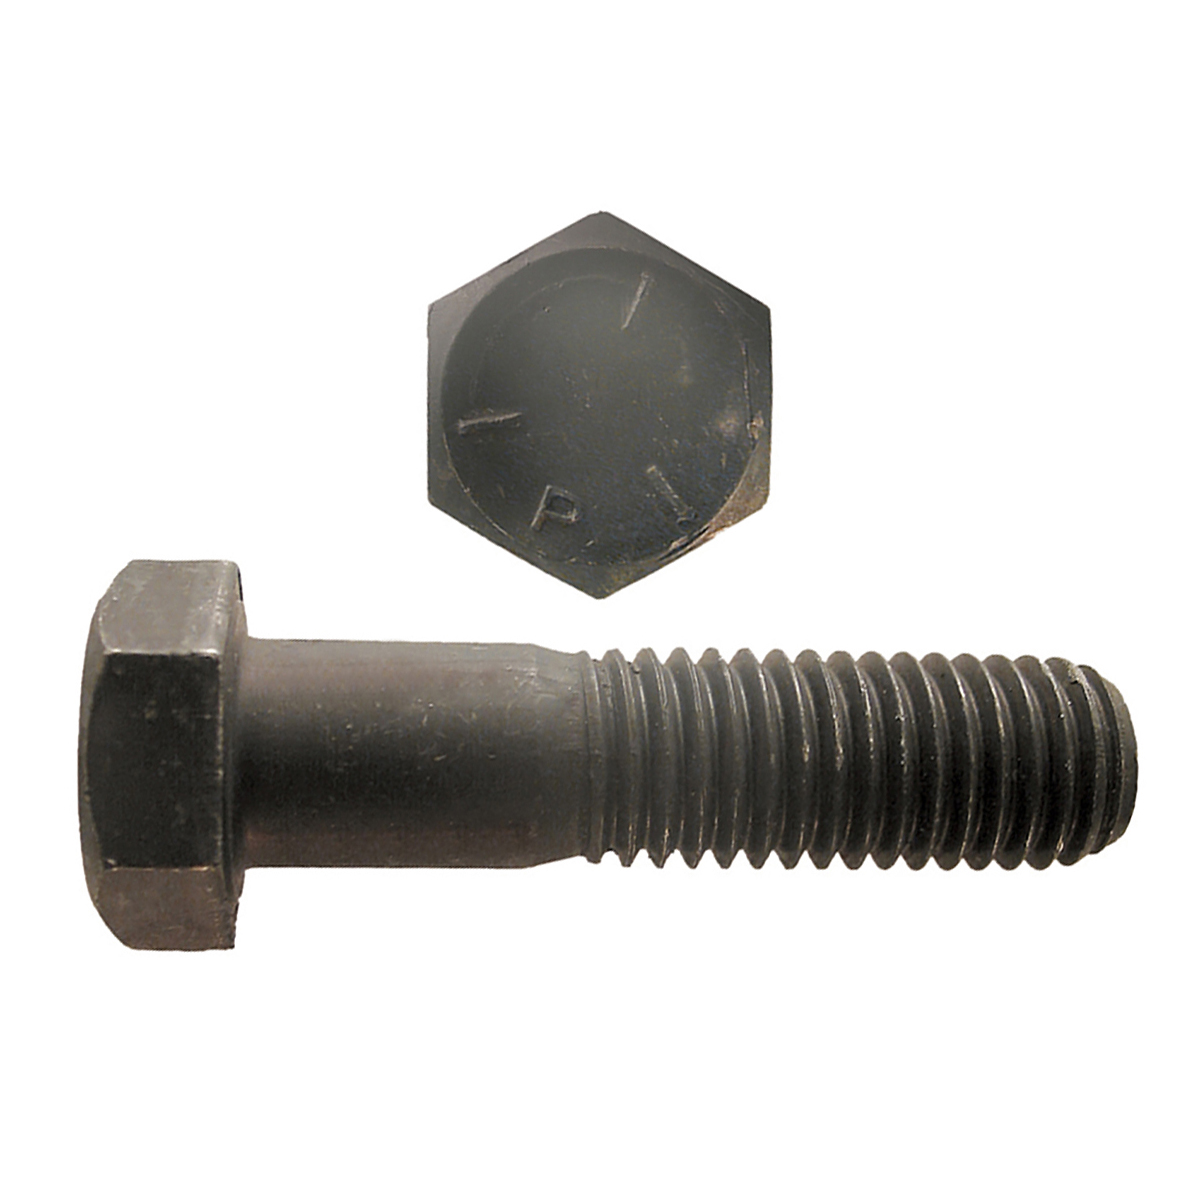 200 18mm stand-off spacer ferrule for plain or corrugated sheet spacing 